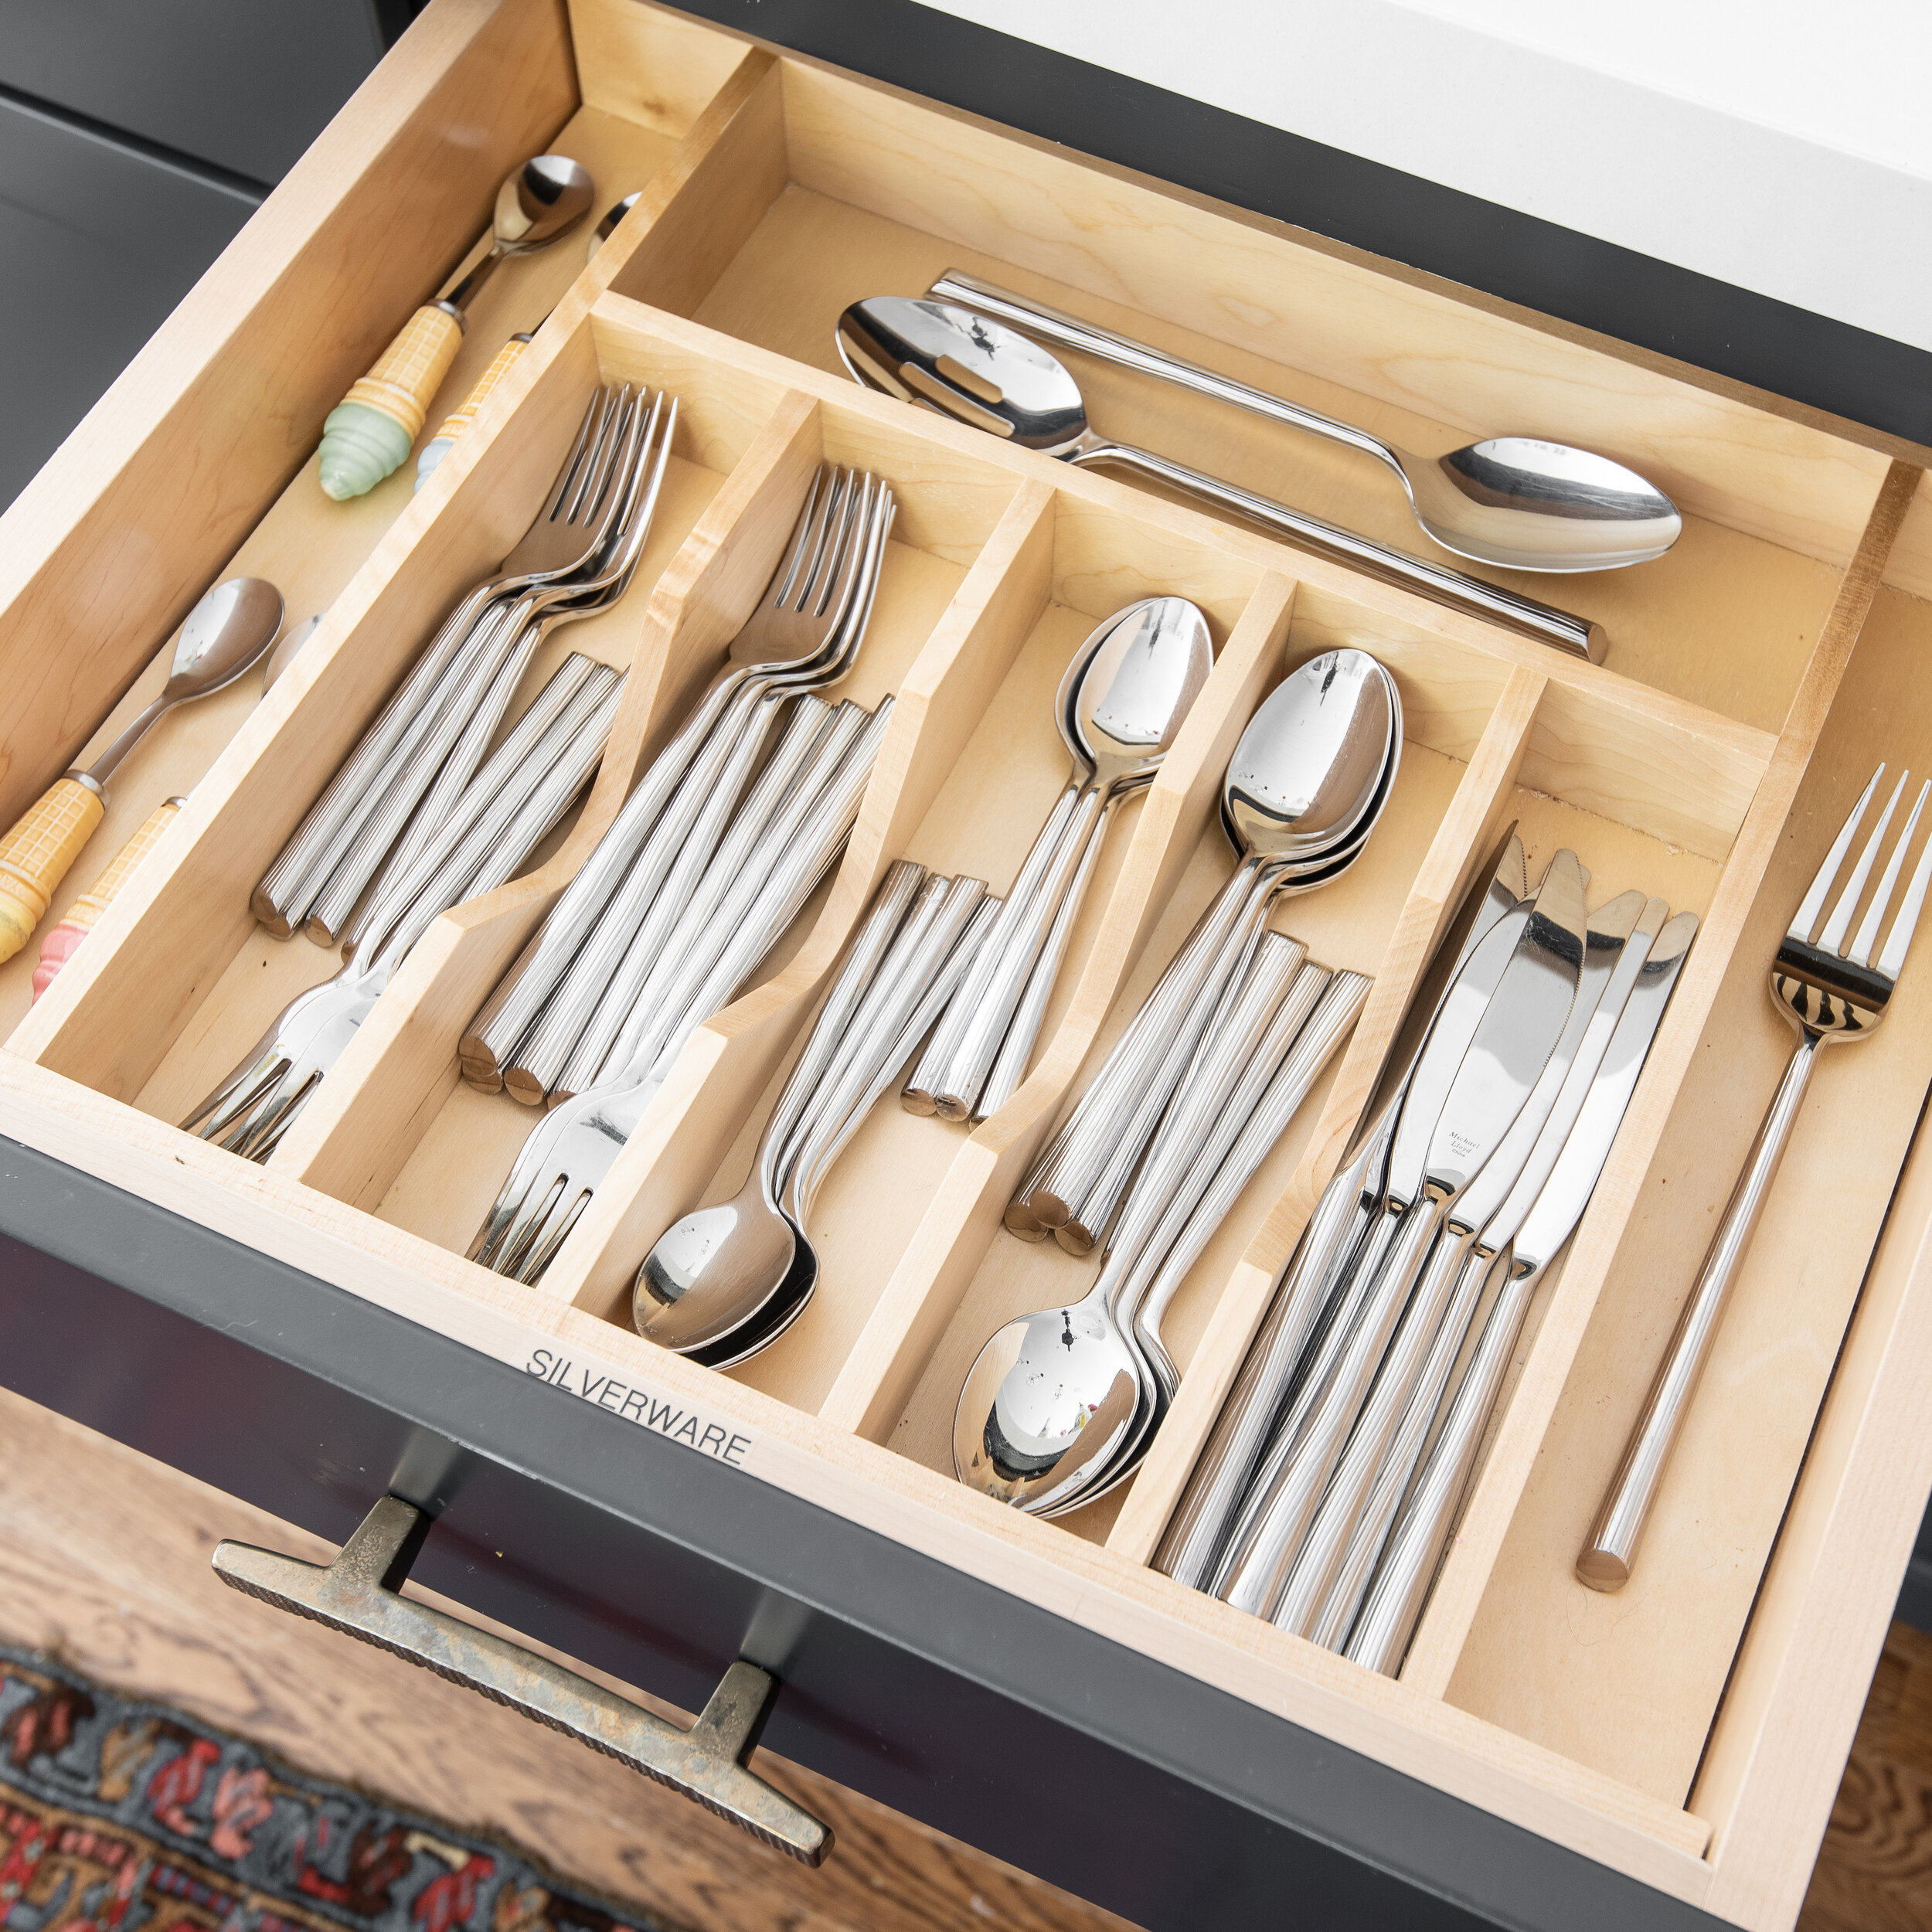 Flatware Storage Case, Silverware Storage Box Chest with Adjustable  Dividers, Fabric Container Holder for Organizing Utensils, Cutlery,  Flatware